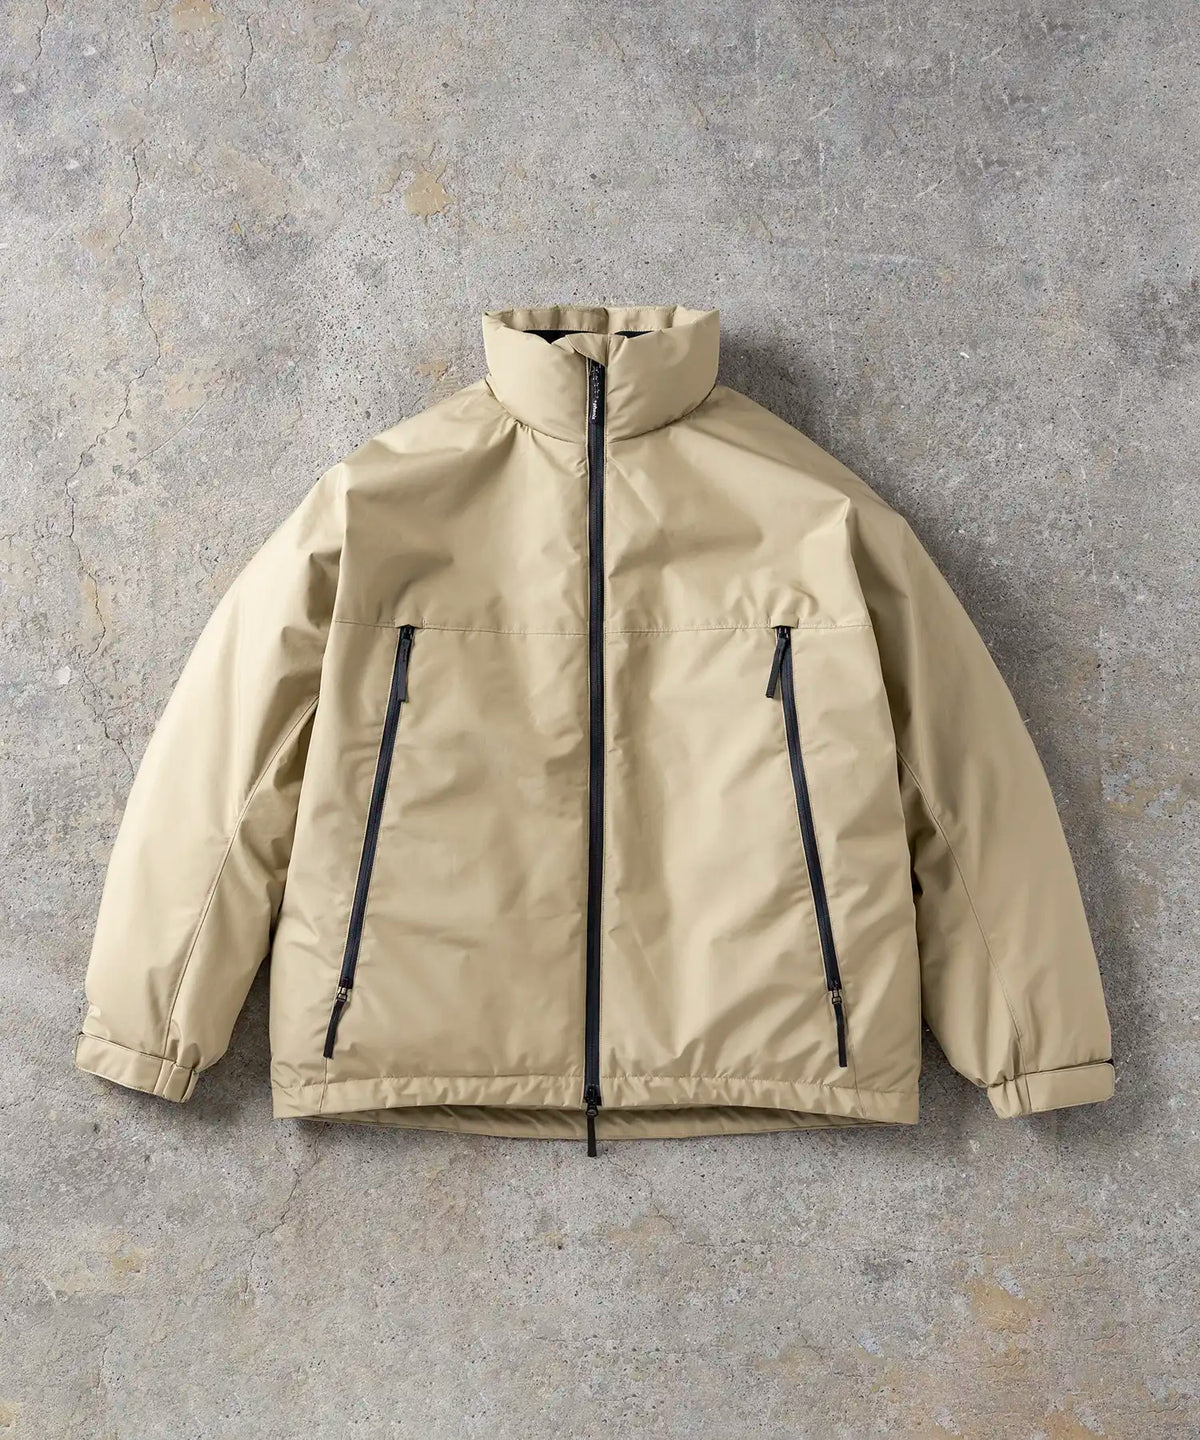 【MENS】GORE DOWN L-7 JACKET / WINDSTOPPER(R) プロダクト BY GORE‑TEX LABS 2023年10月下旬お届け